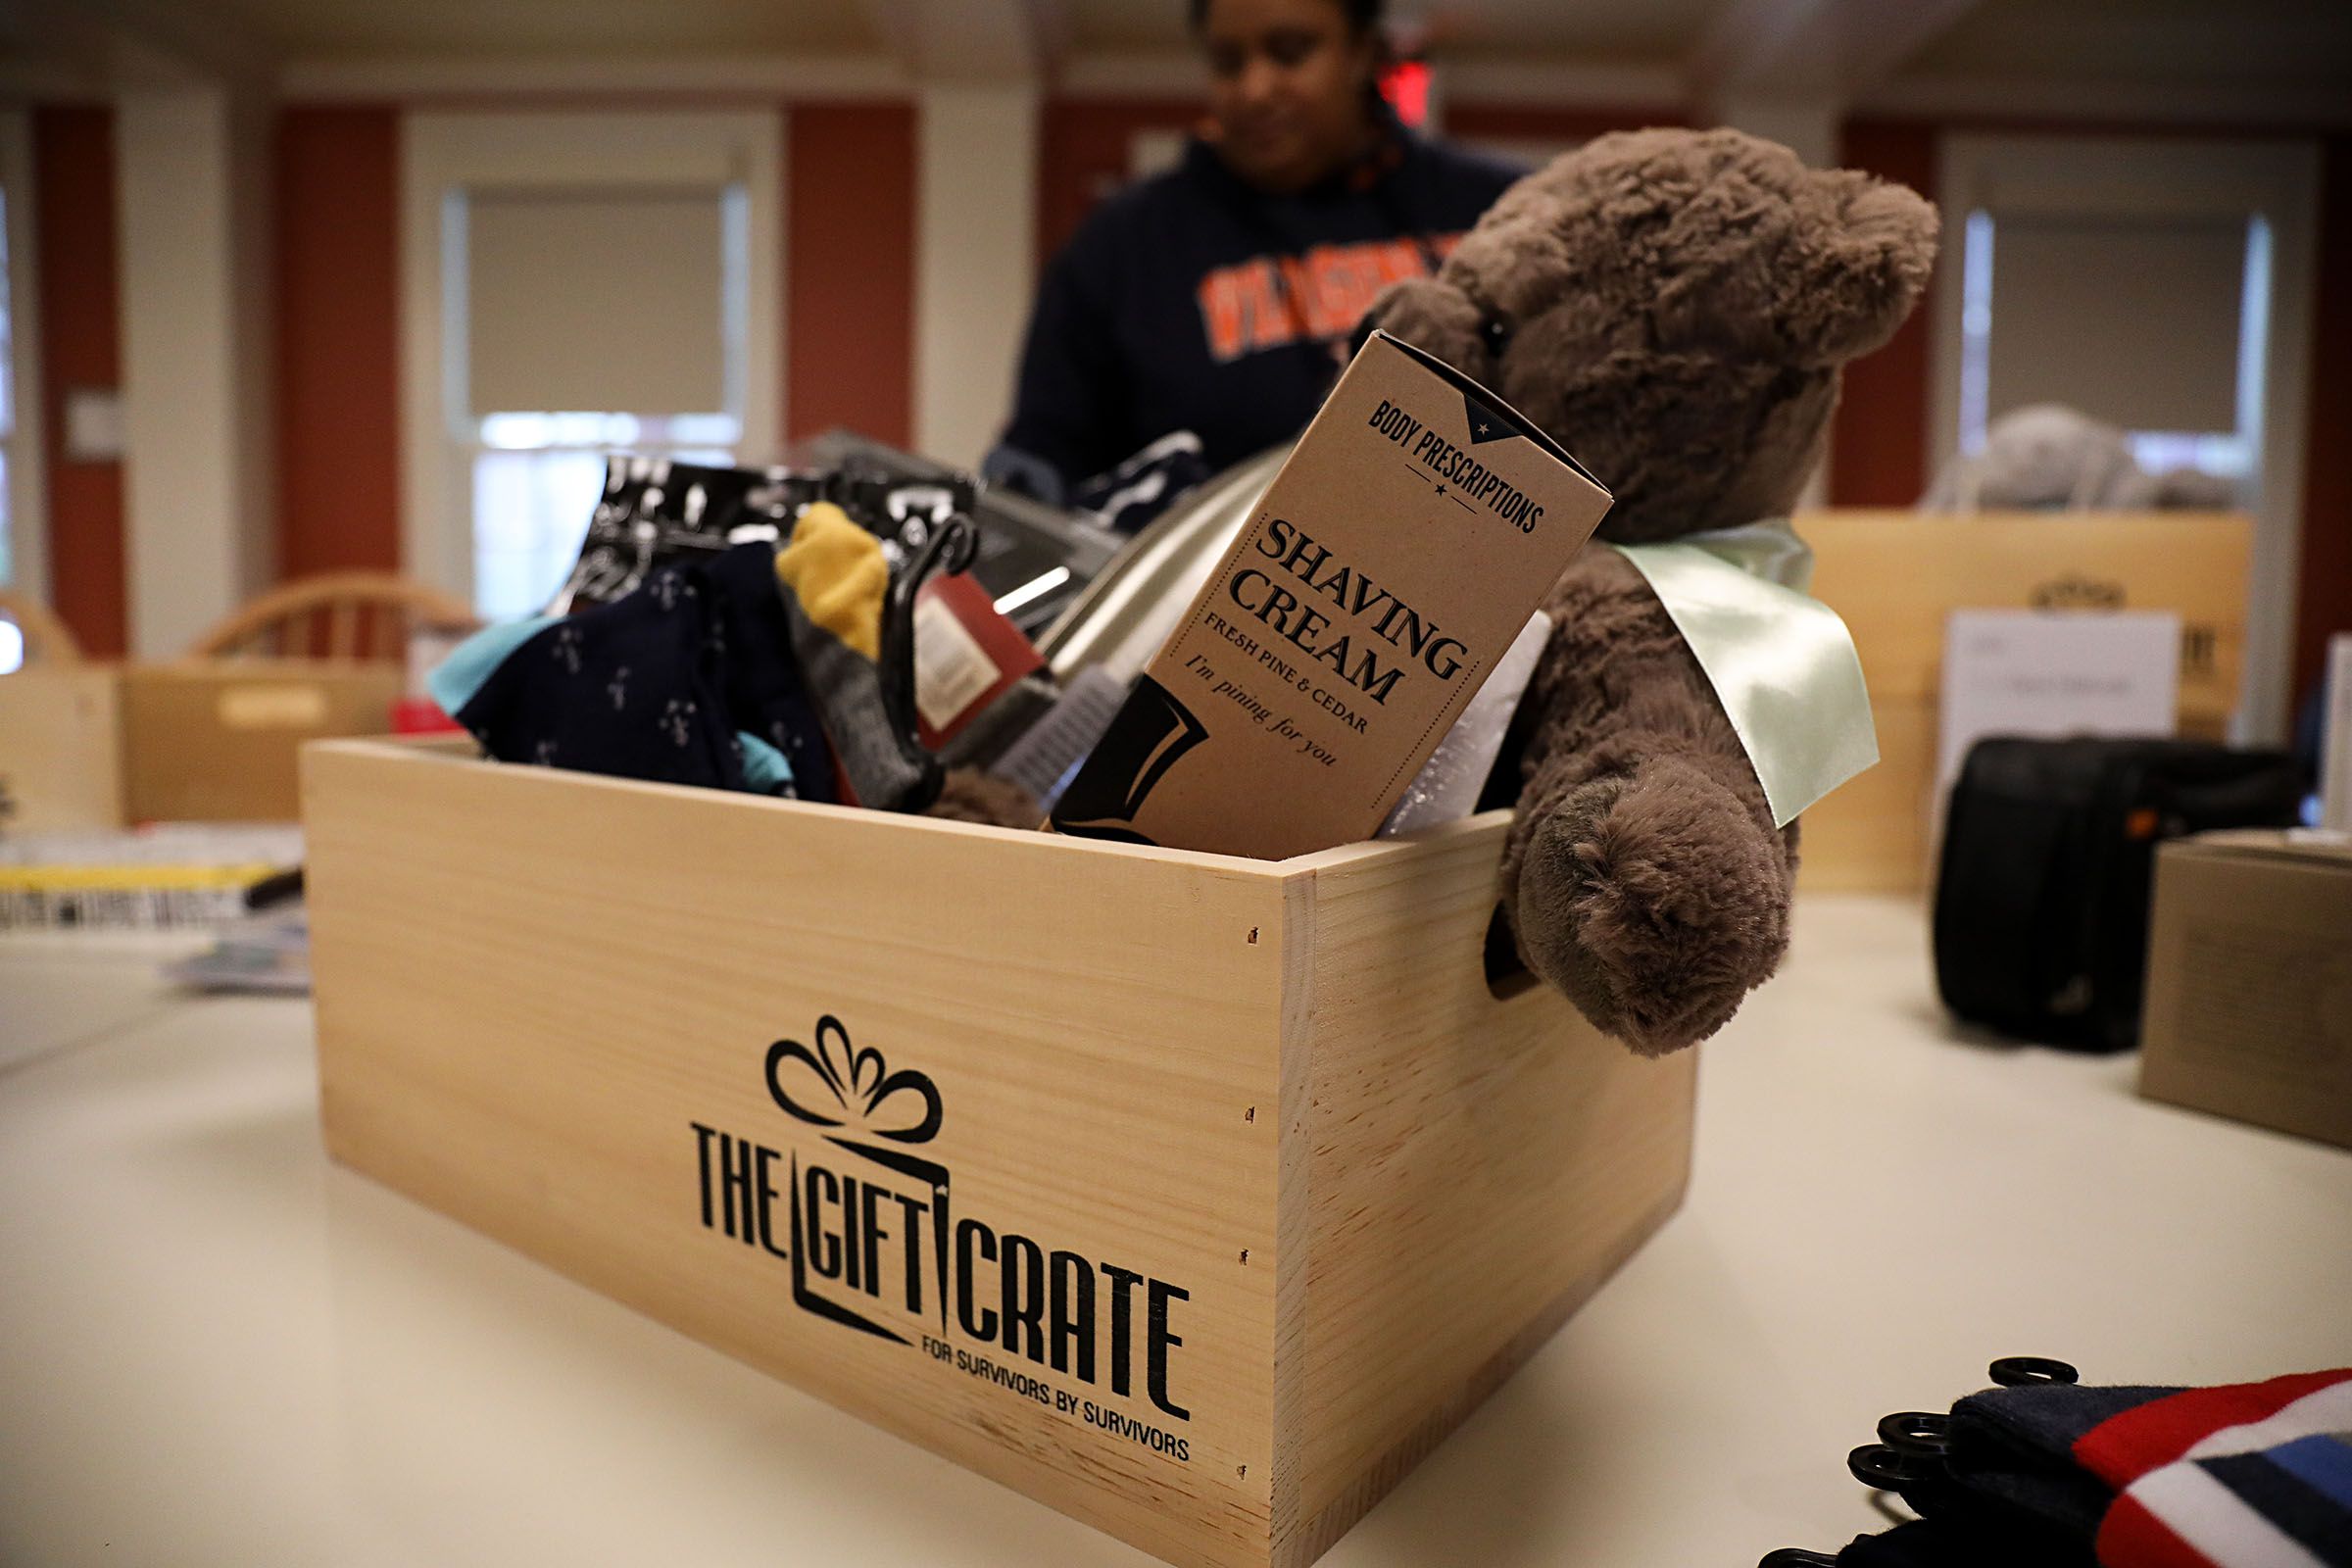 An unfinished Gift Crate, a care package business started by Dia Draper for cancer survivors, sits on a table on Monday, Oct. 23, 2017, in the common area of the Triangle House on the Dartmouth College campus in Hanover, N.H. A colon cancer survivior, Draper said she had the idea to start the business after she recieved gifts and thoughts of encouragement while in treatment. (Valley News - Charles Hatcher) Copyright Valley News. May not be reprinted or used online without permission. Send requests to permission@vnews.com